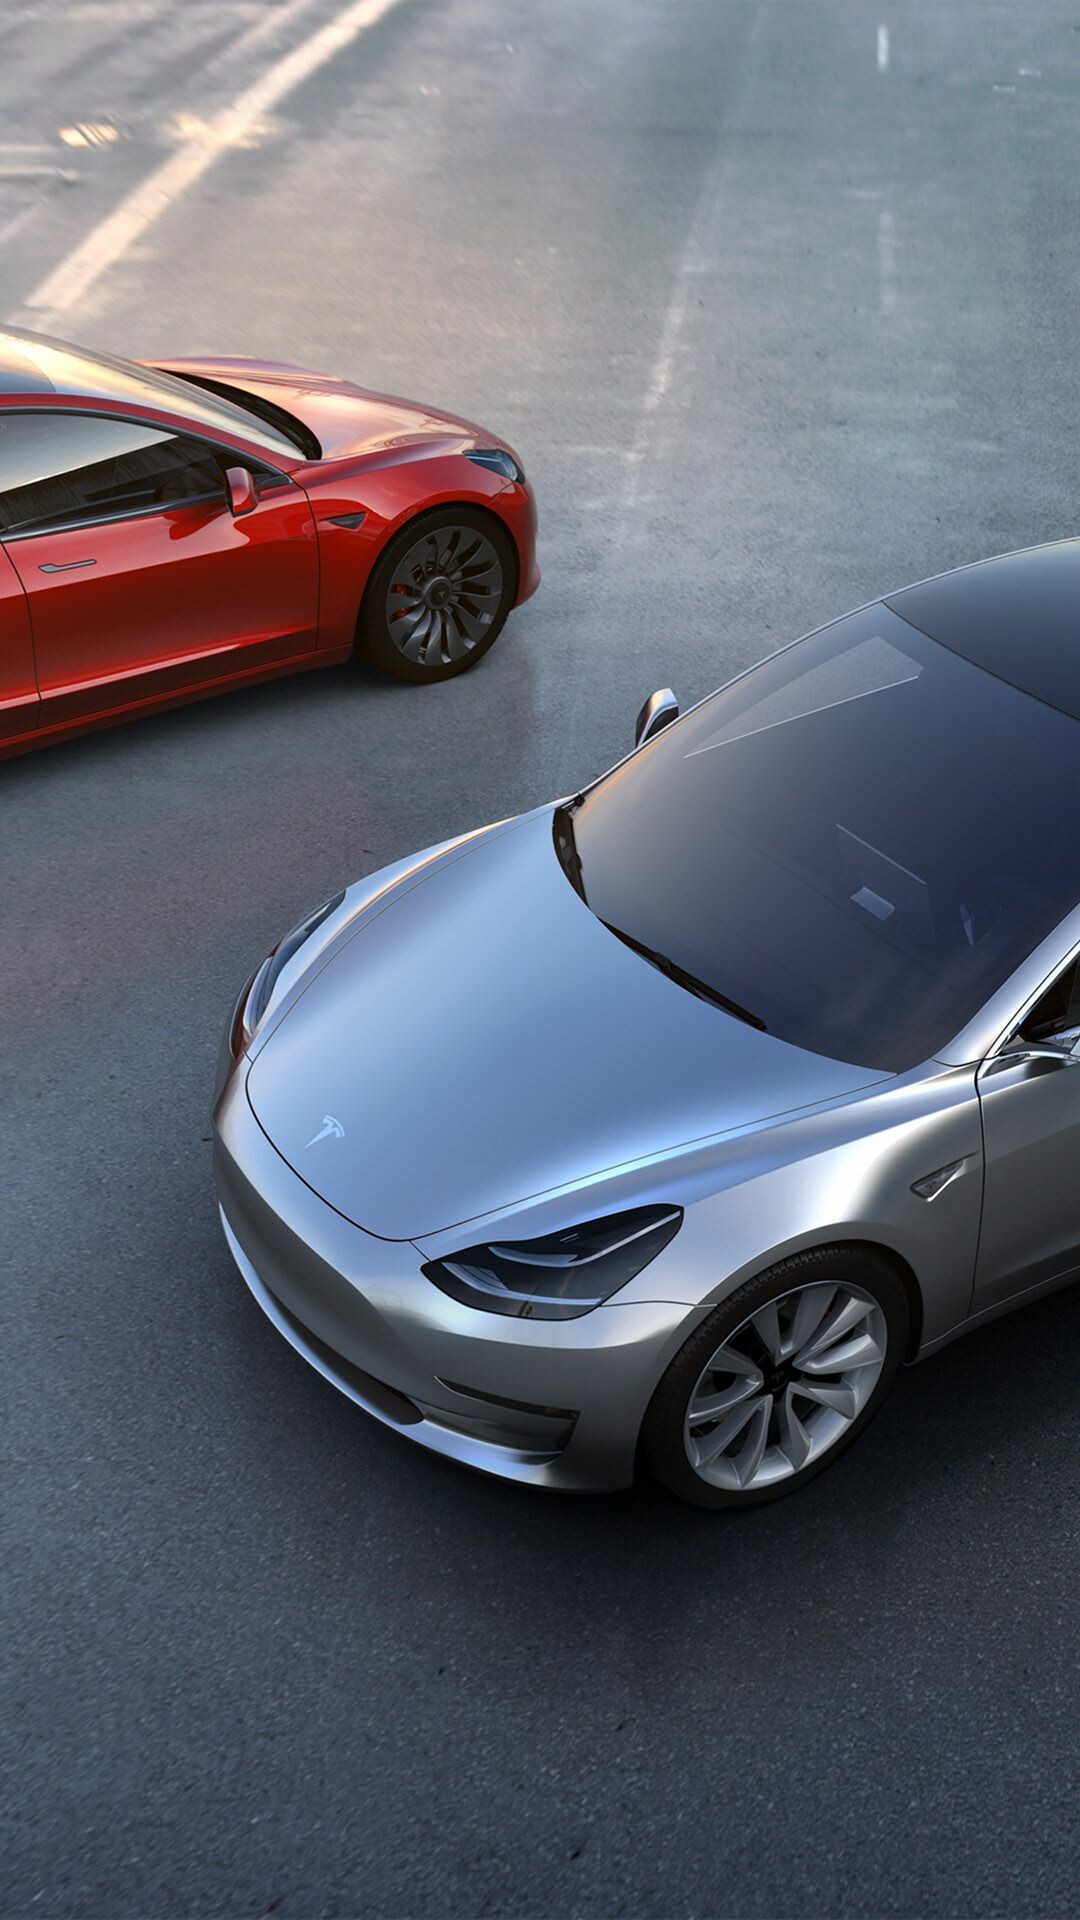 Tesla Model Y: The car shares an estimated 75 percent of its parts with the version 3. 1080x1920 Full HD Wallpaper.